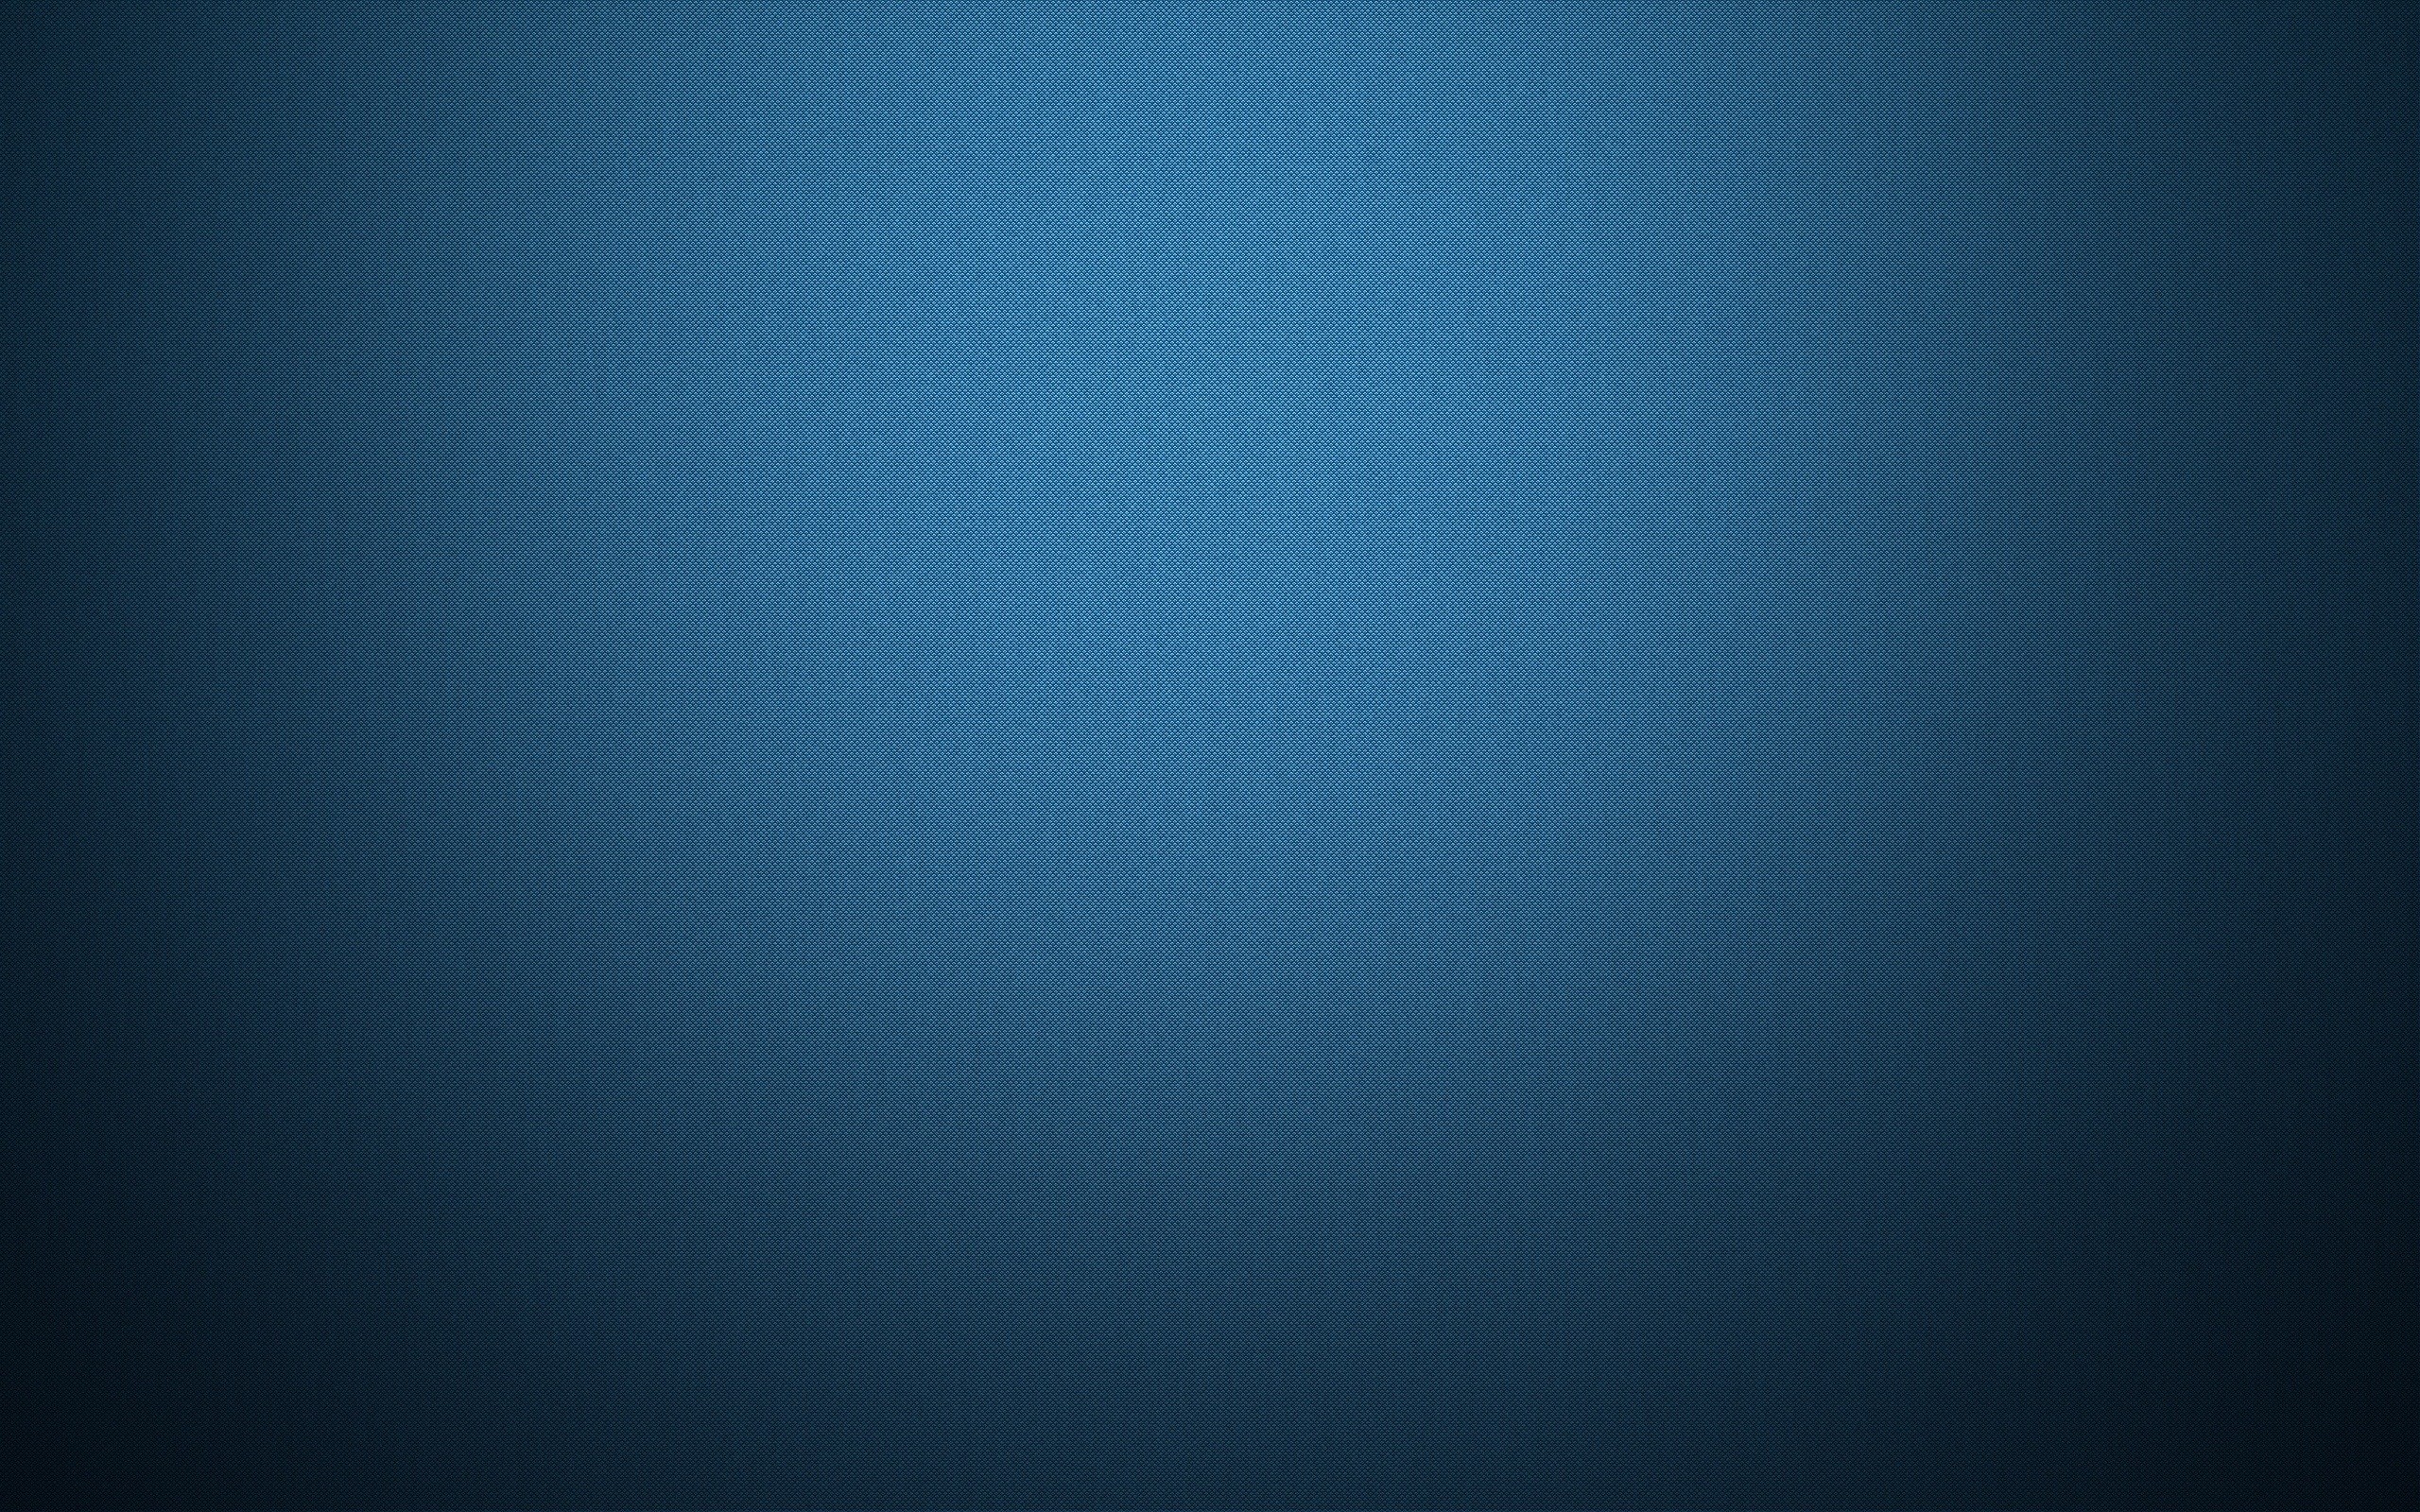 Teal And Black Background Hd Dark blue background wallpaper 2560x1600